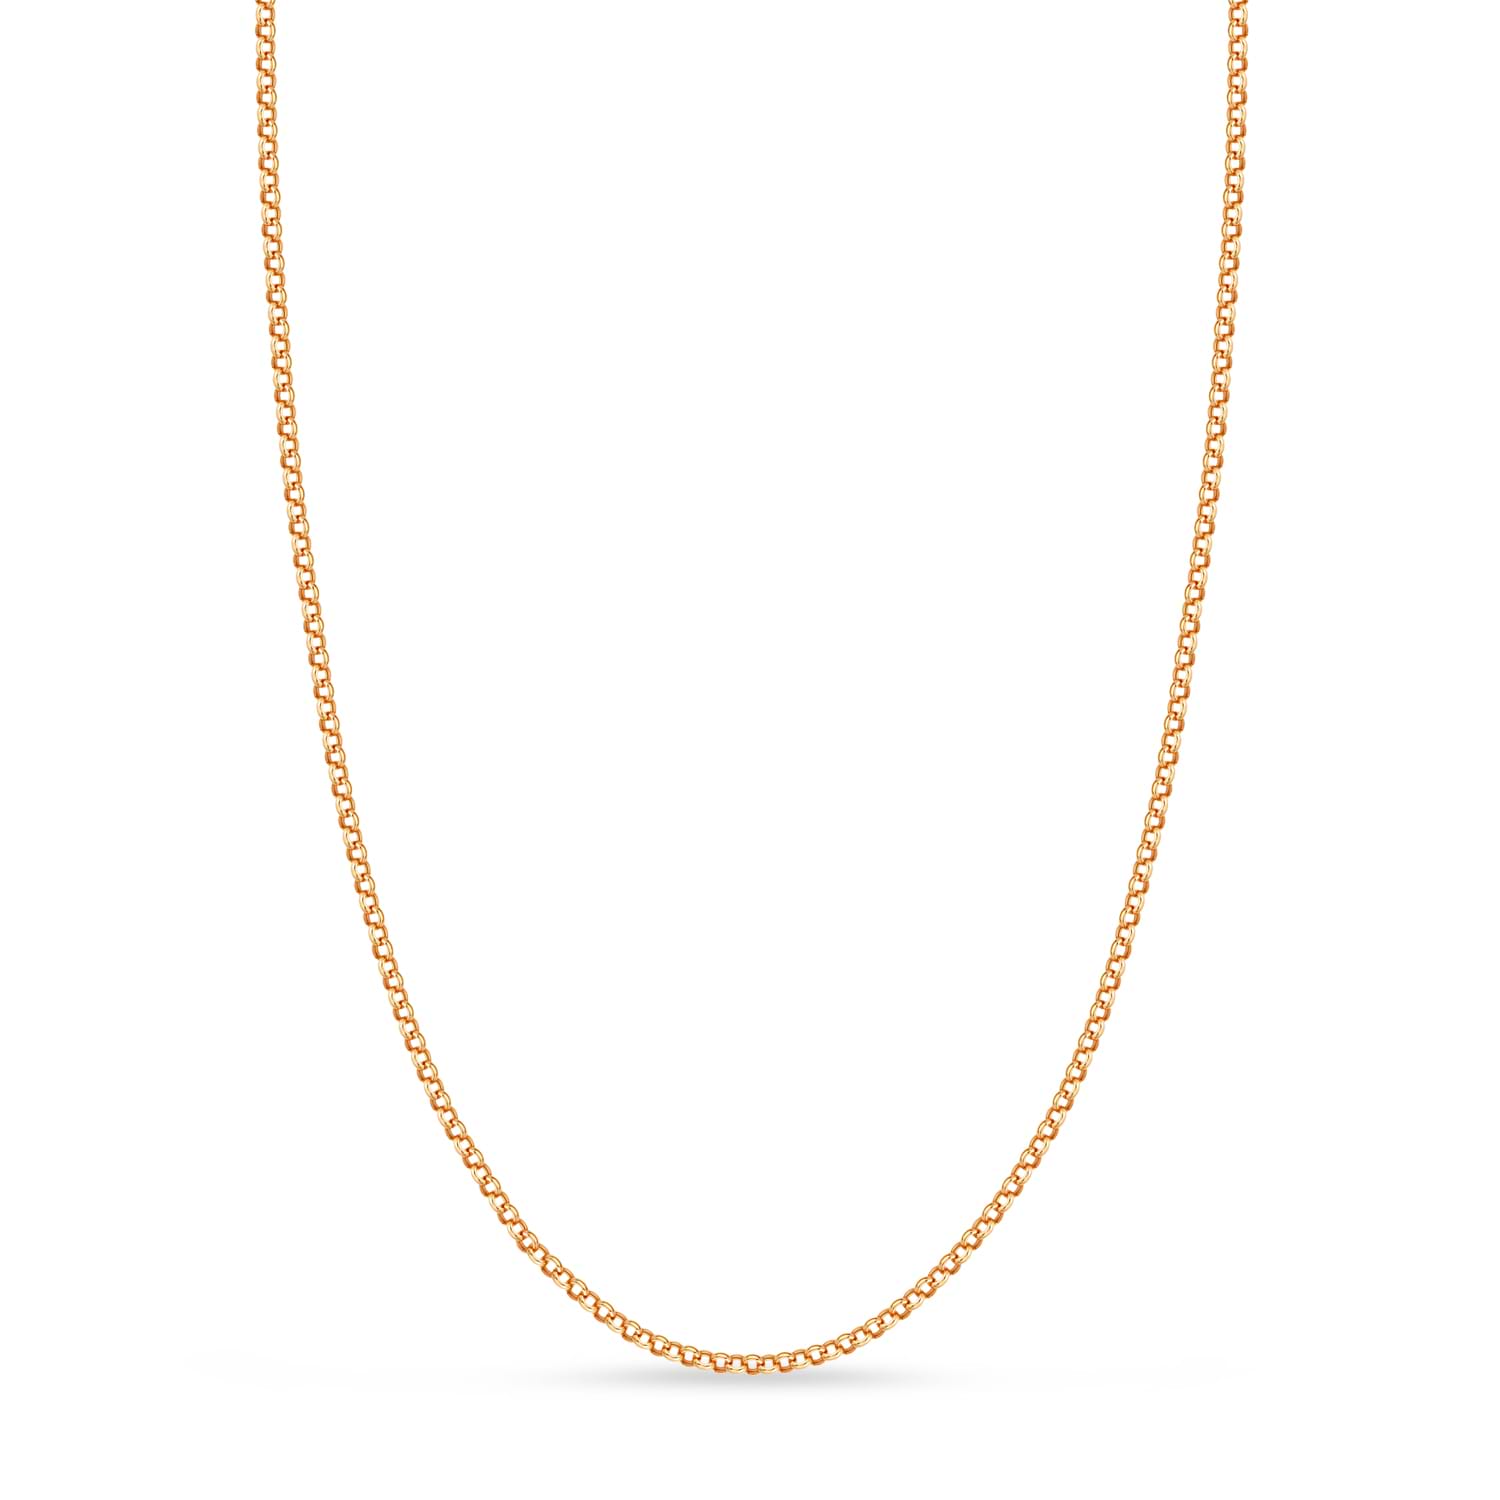 Hollow Rolo Chain Necklace 14k Rose Gold